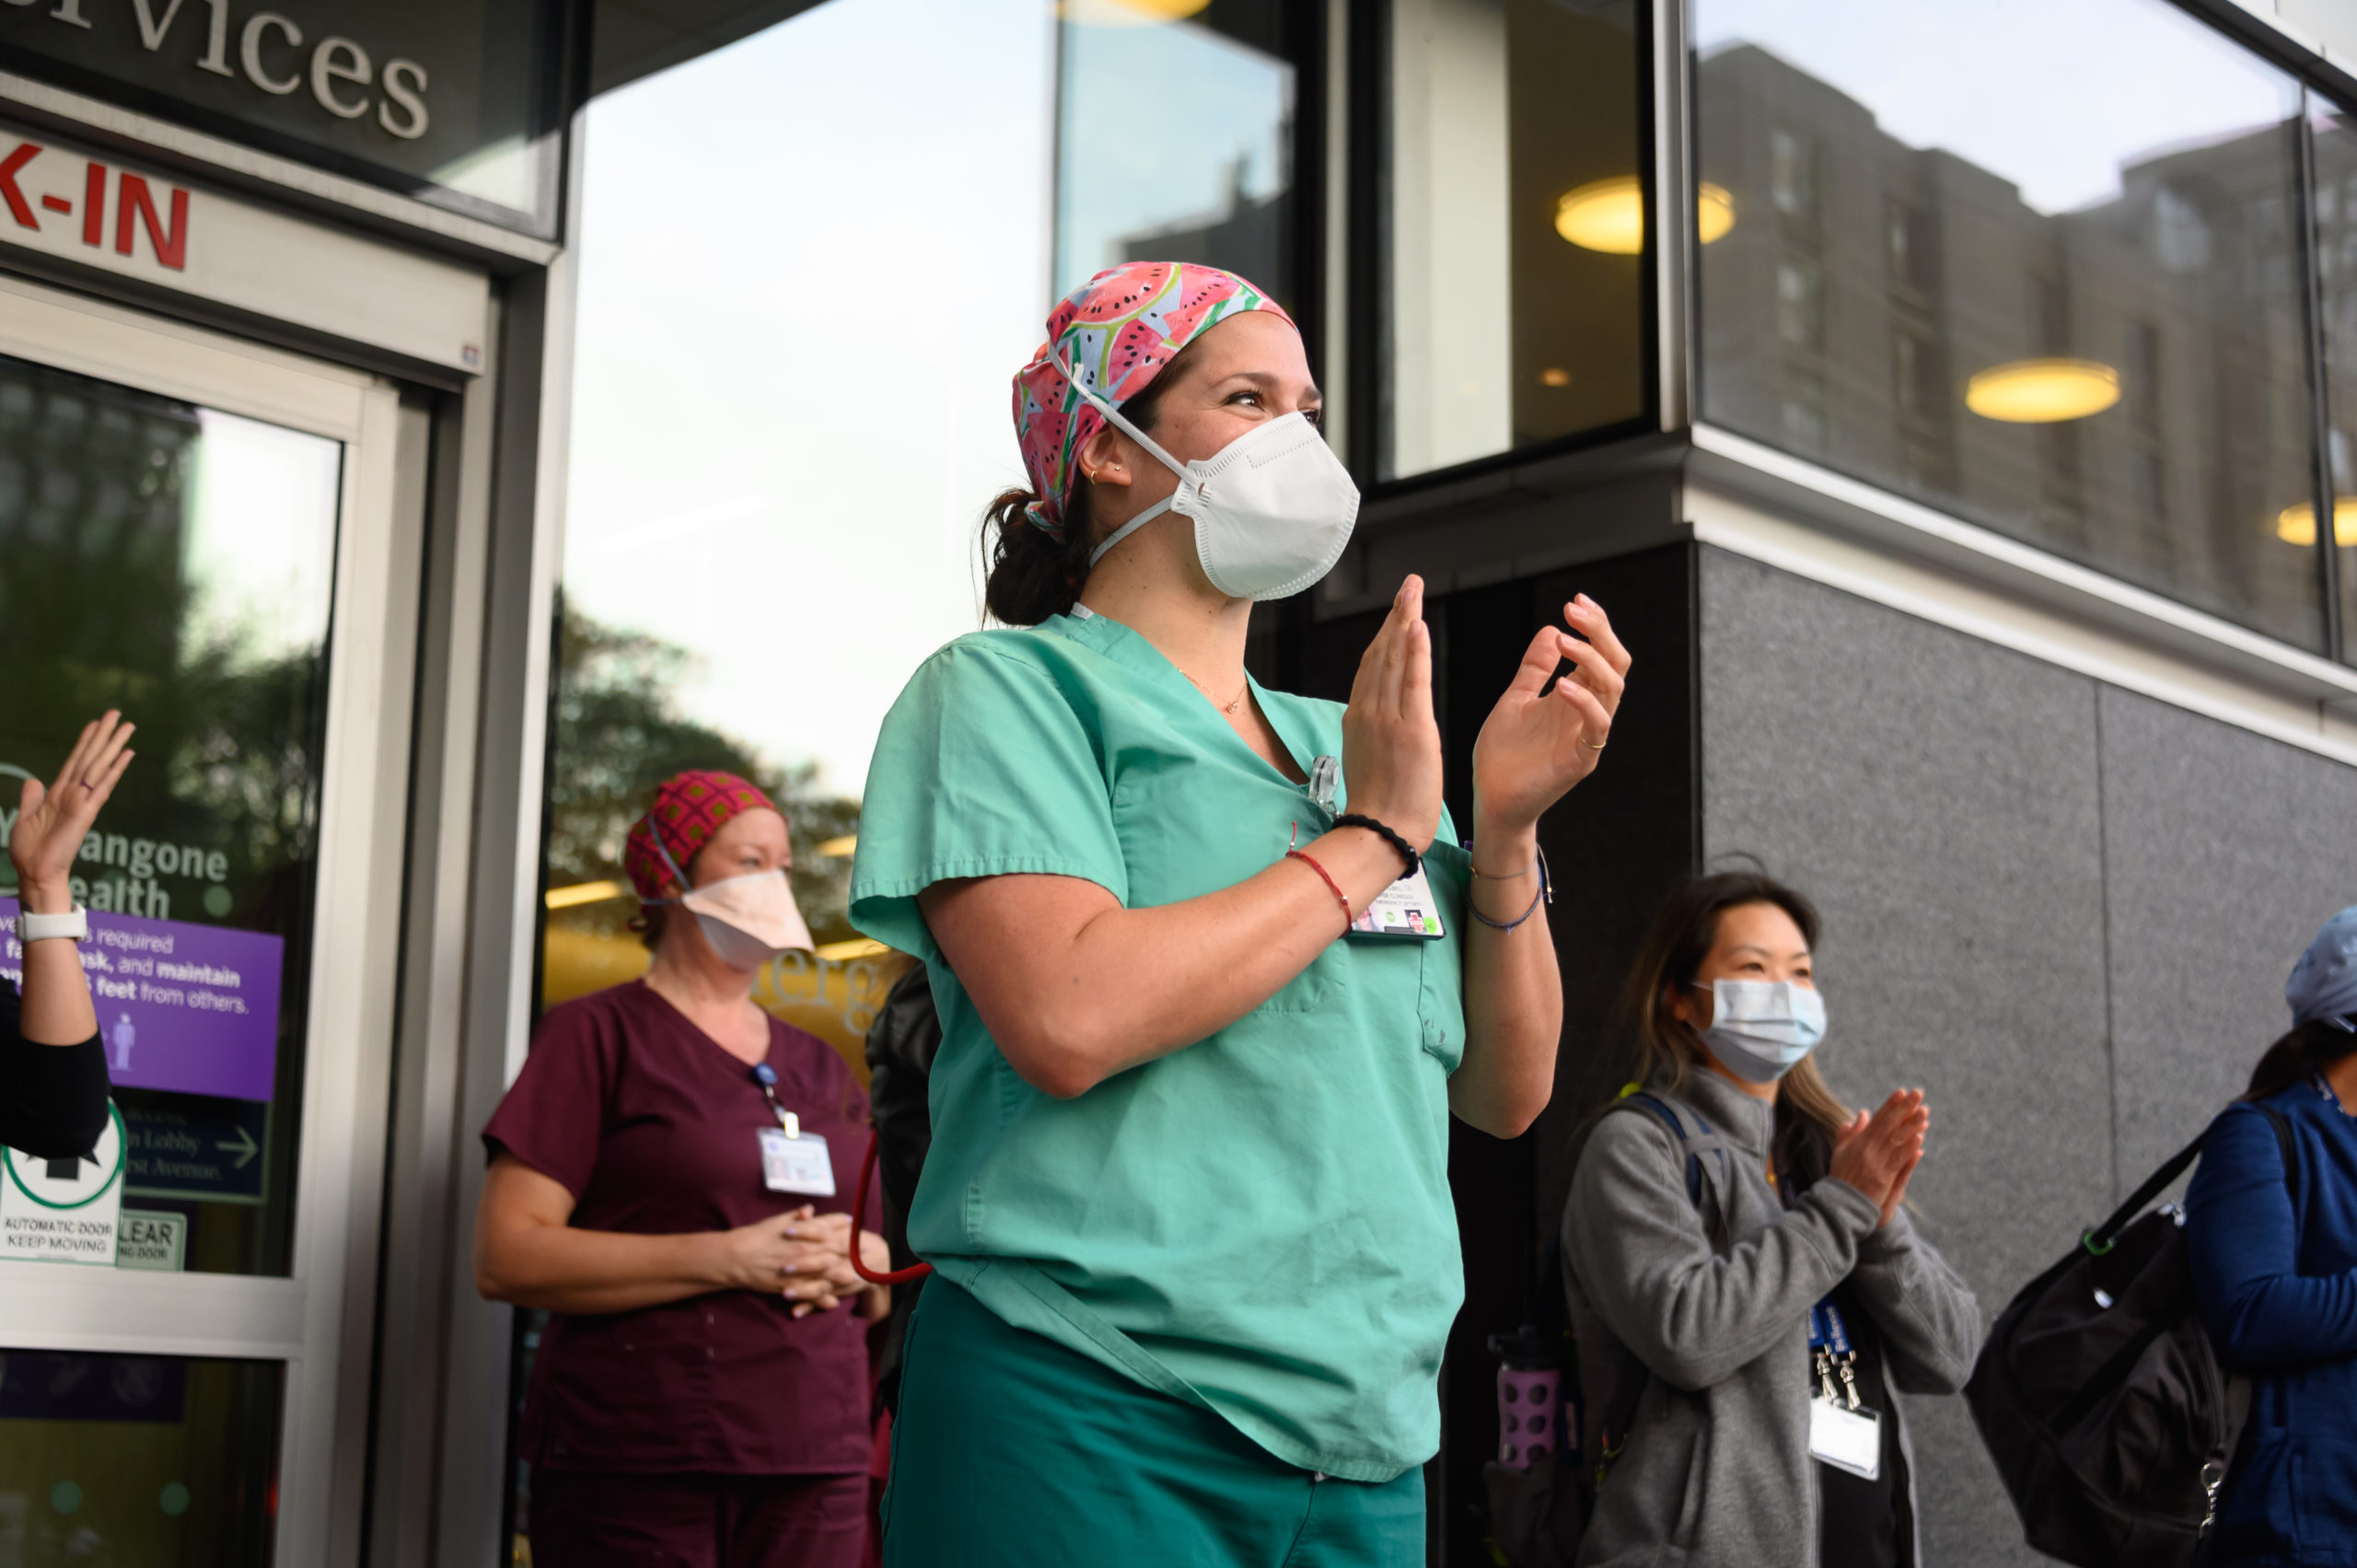 NEW YORK, NEW YORK - MAY 19: Medical workers wearing protective masks stand outside NYU Langone Health hospital as people applaud to show their gratitude to medical staff and essential workers during the coronavirus pandemic on May 19, 2020 in New York City. COVID-19 has spread to most countries around the world, claiming over 324,000 lives with over 4.9 million infections reported.